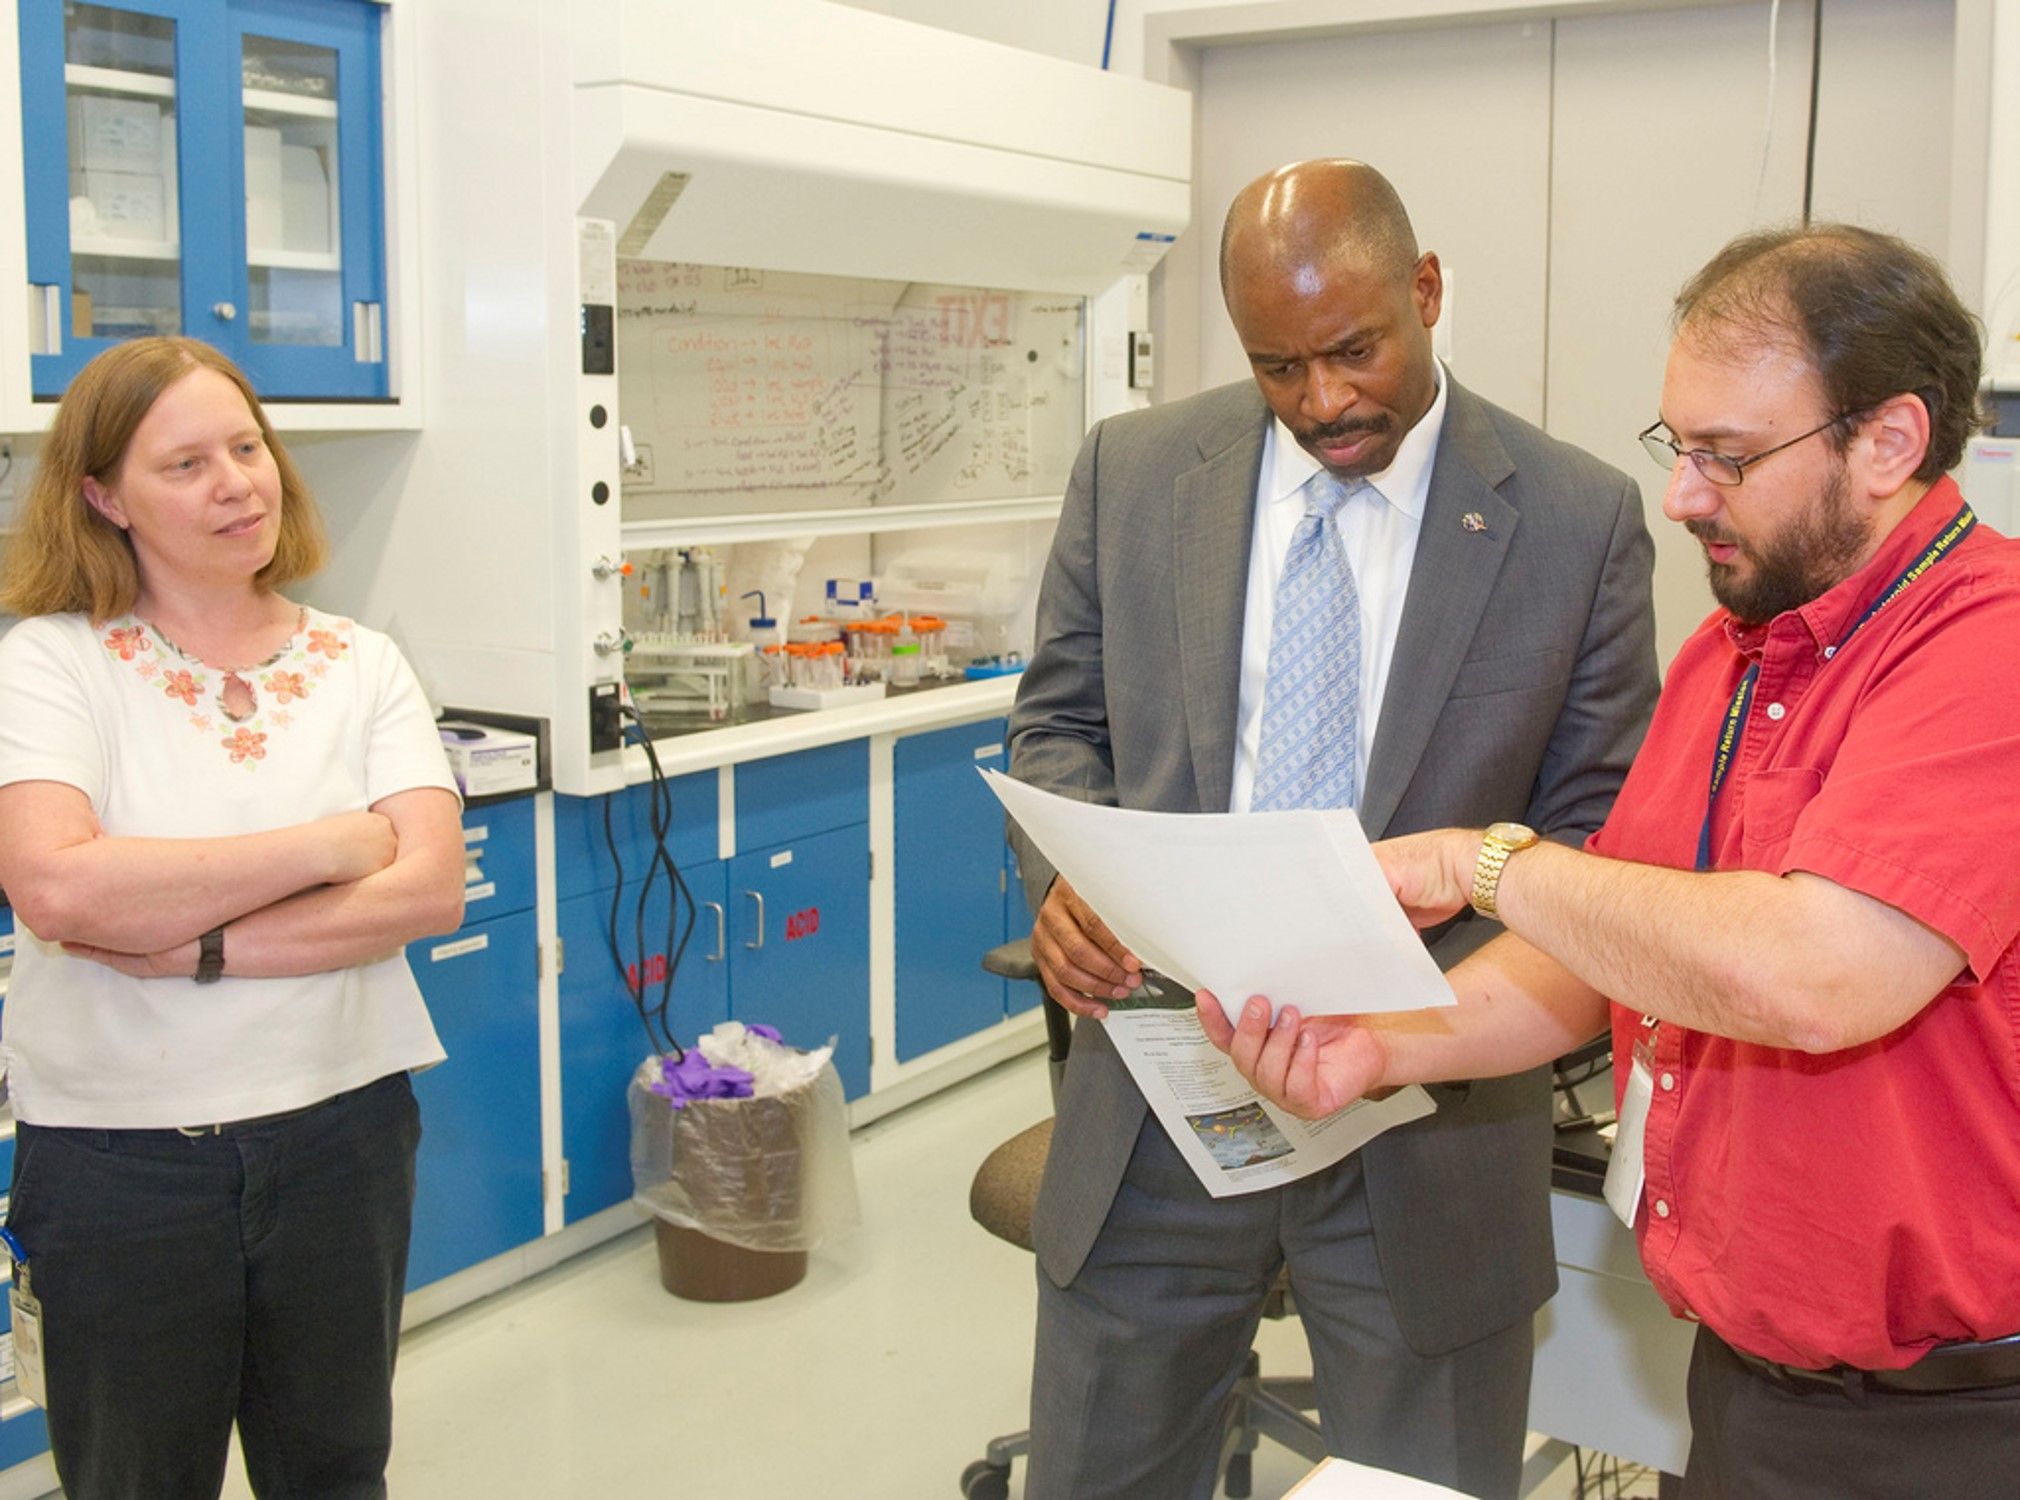 Leland Melvin talking with the Astrobiology Analytical Laboratory scientists.